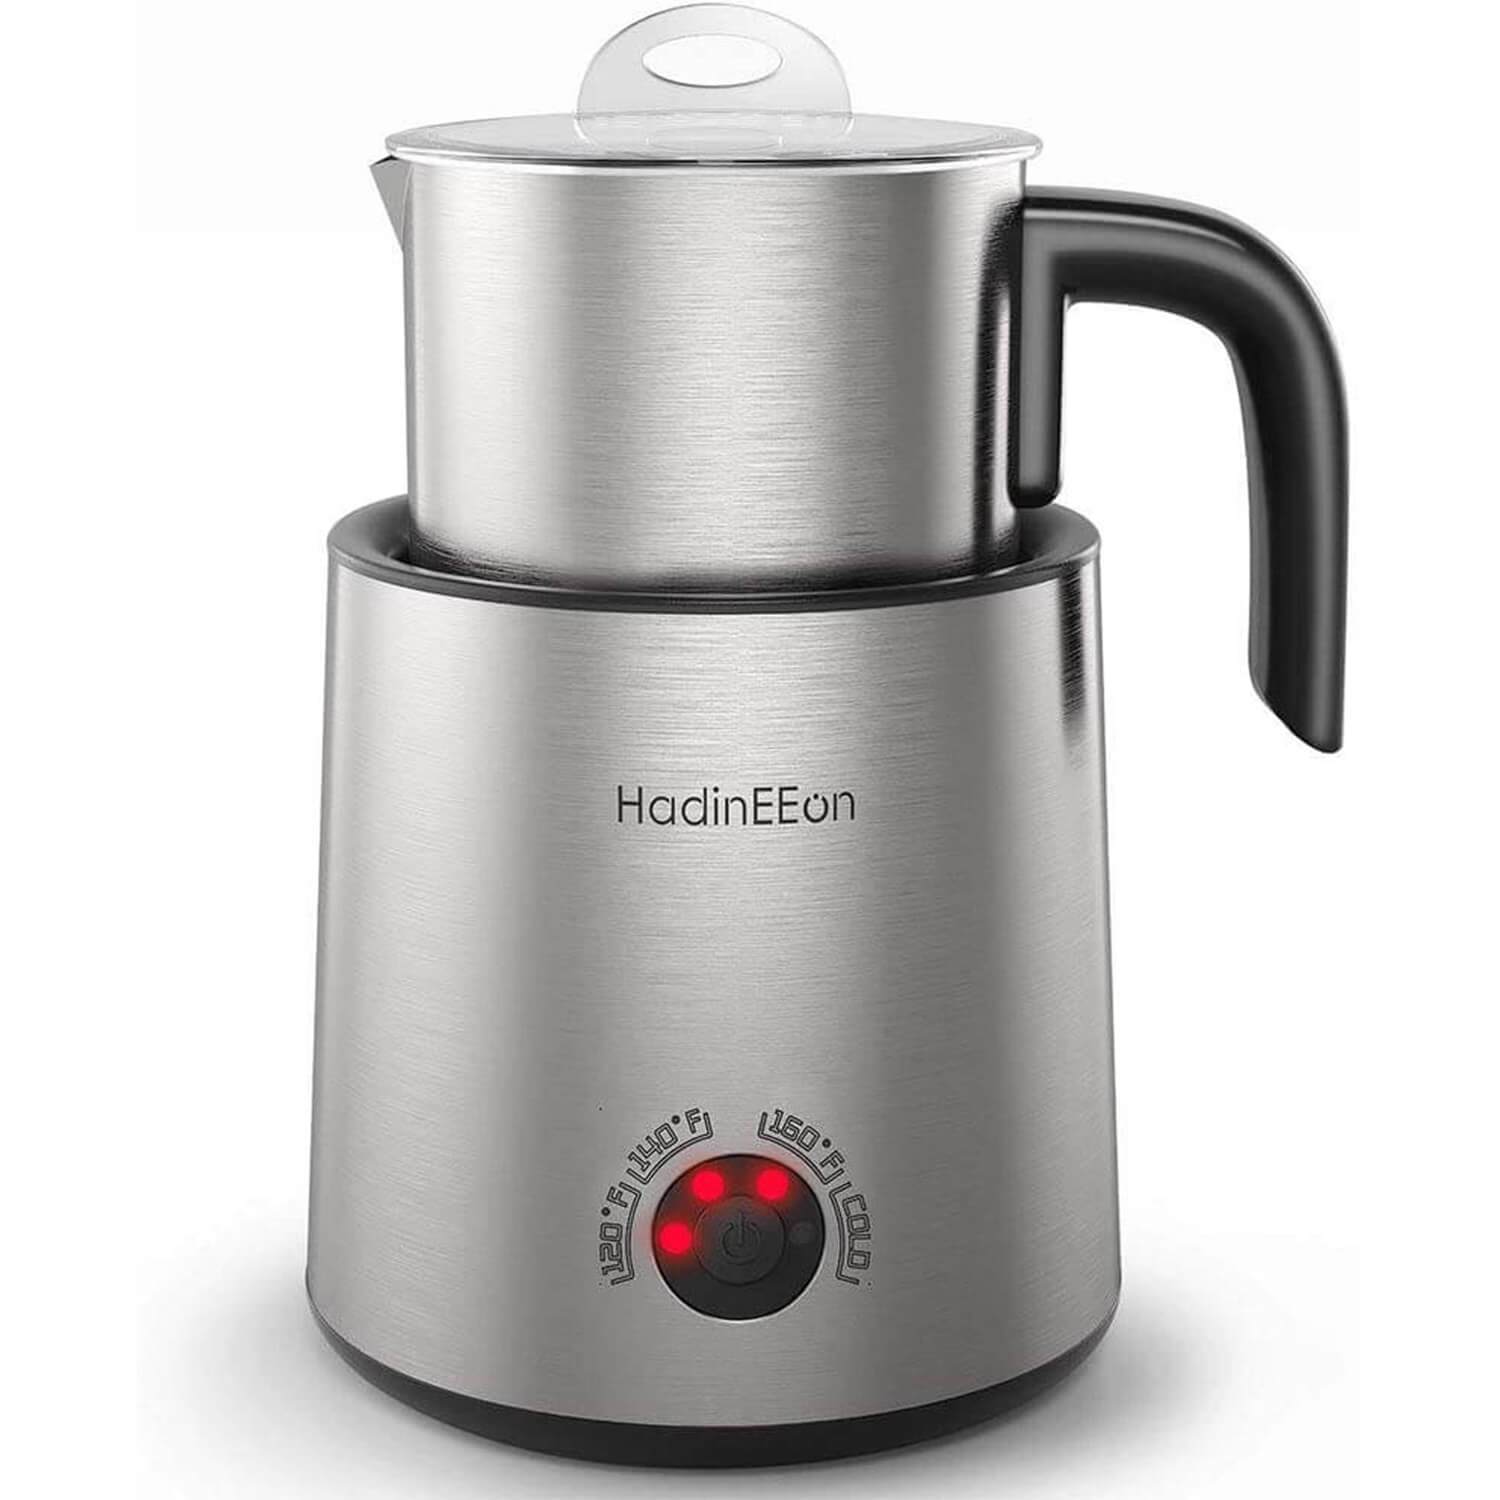 HadinEEon Variable Temperature Milk Frother, Dishwasher Safe Stainless Featured Image